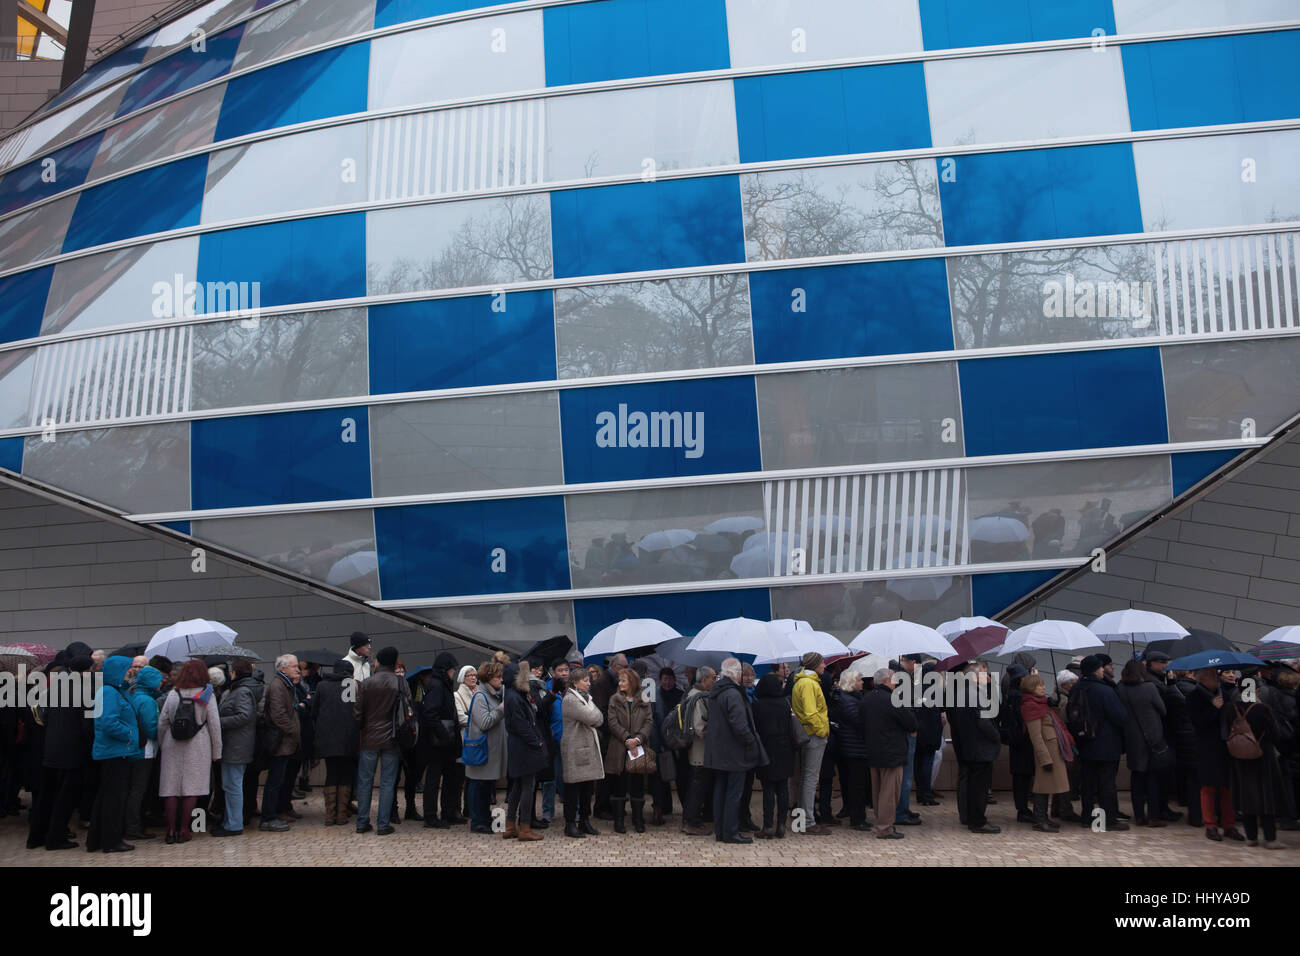 Queue of visitors to the Fondation Louis Vuitton in the Bois de Boulogne in  Paris, France. People wait for the security control to visit the exhibition  Icons of Modern Art from the